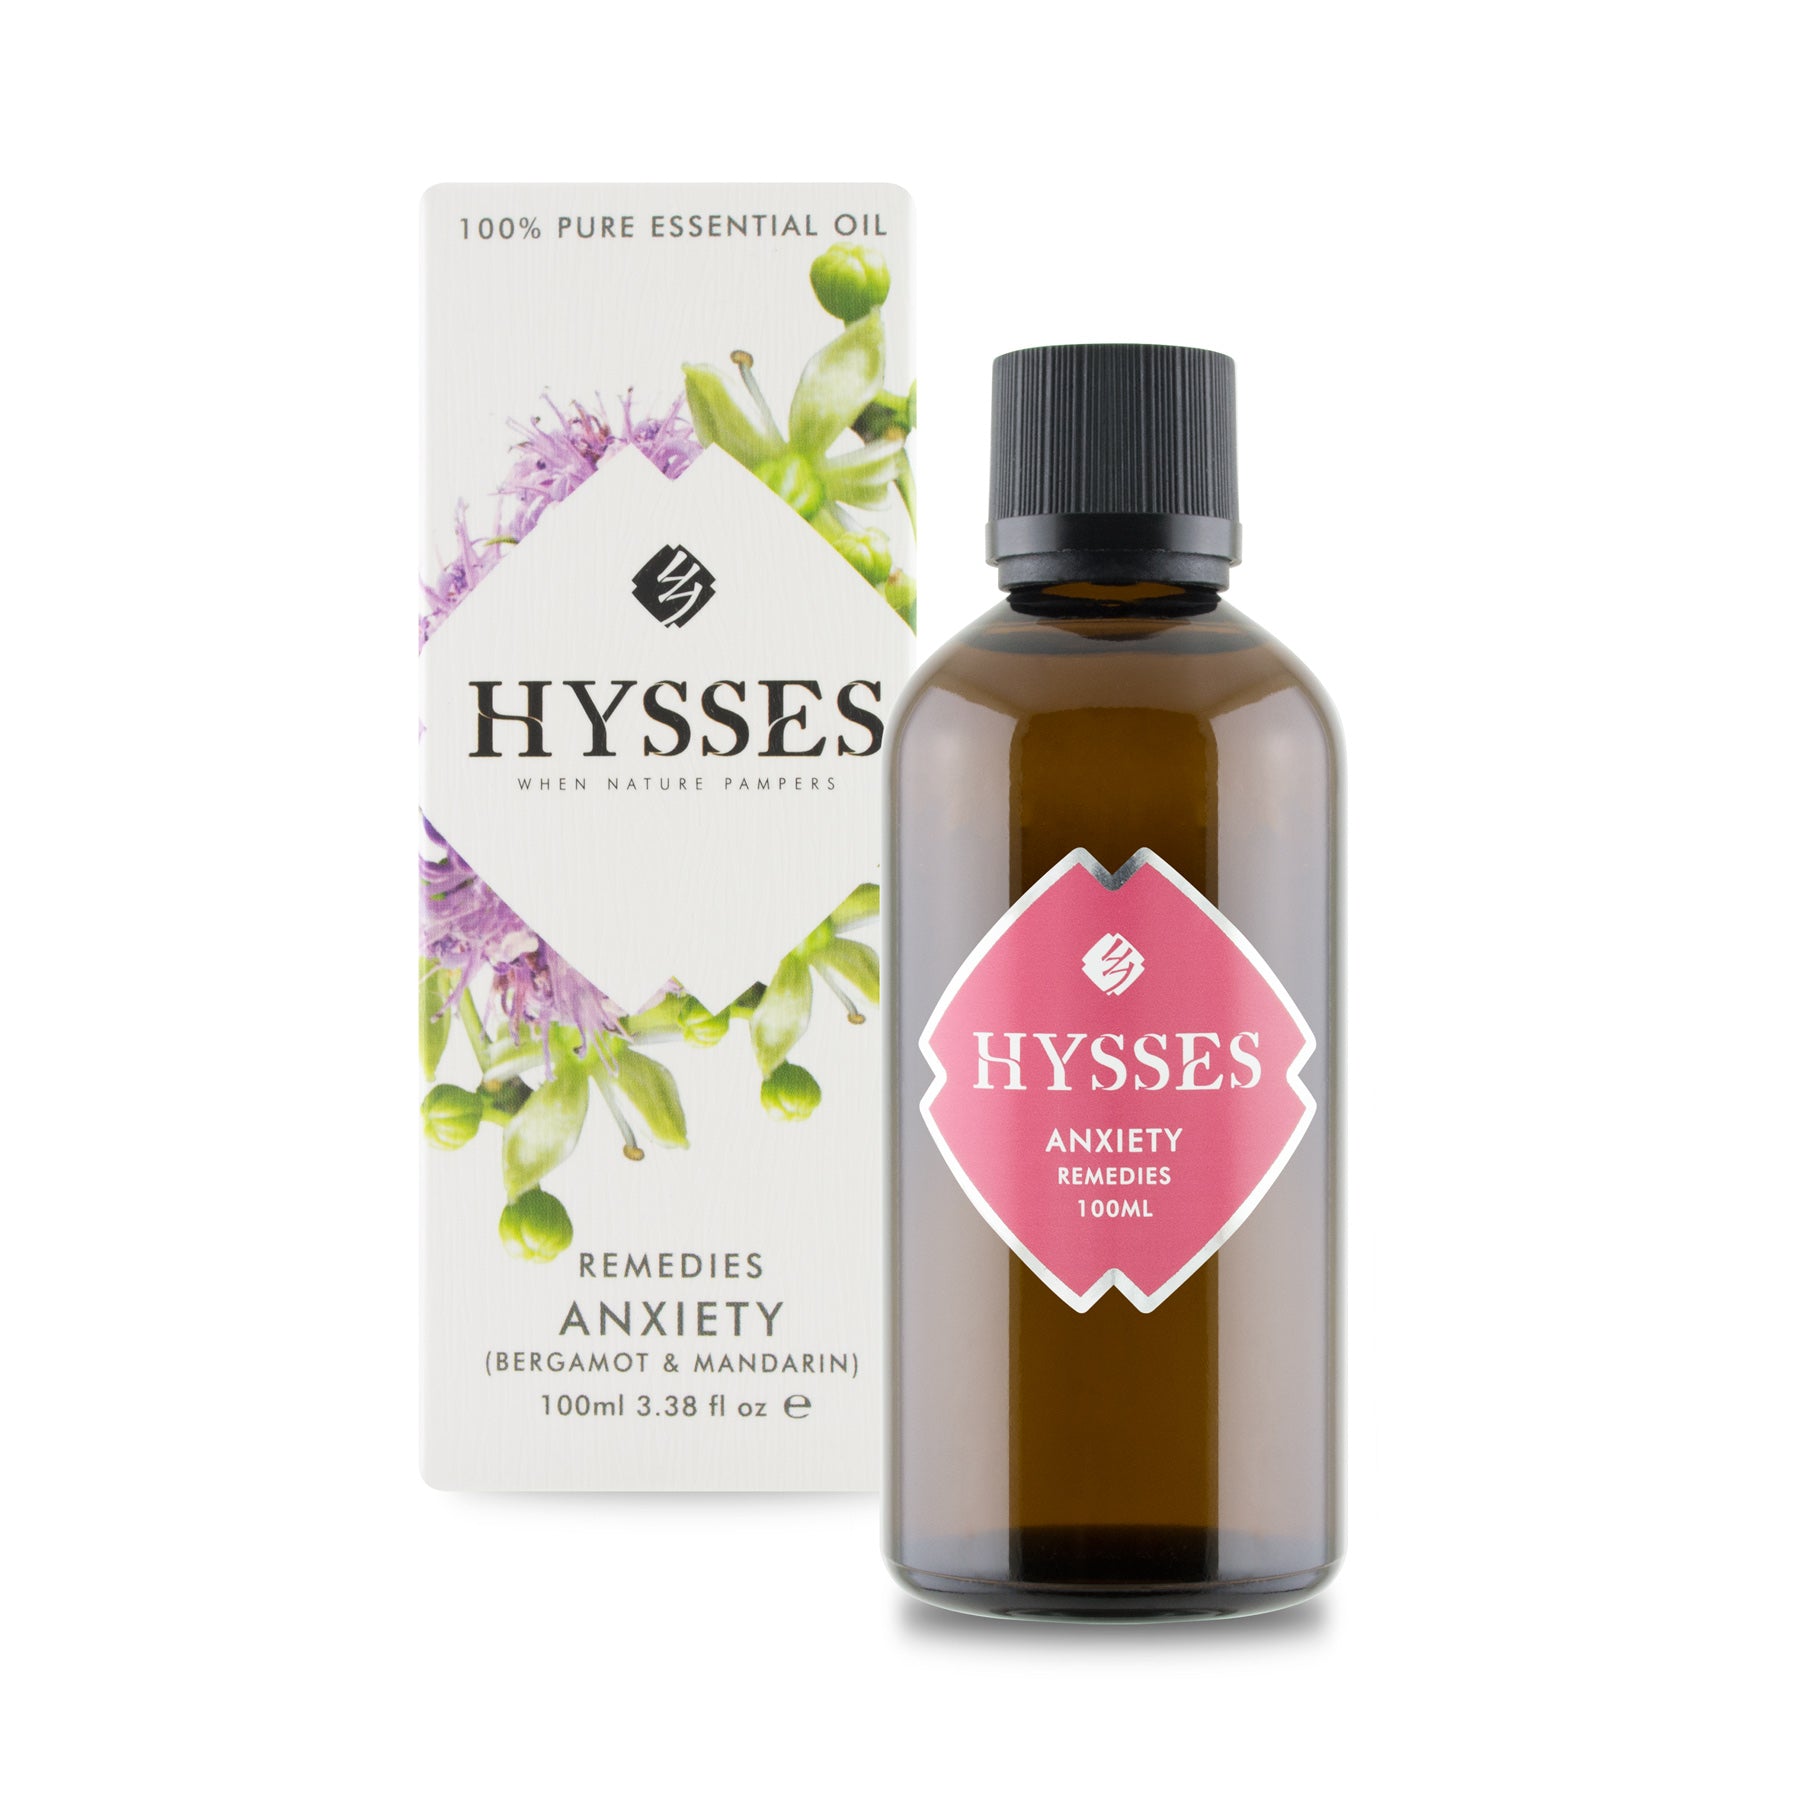 Remedies, Anxiety - HYSSES